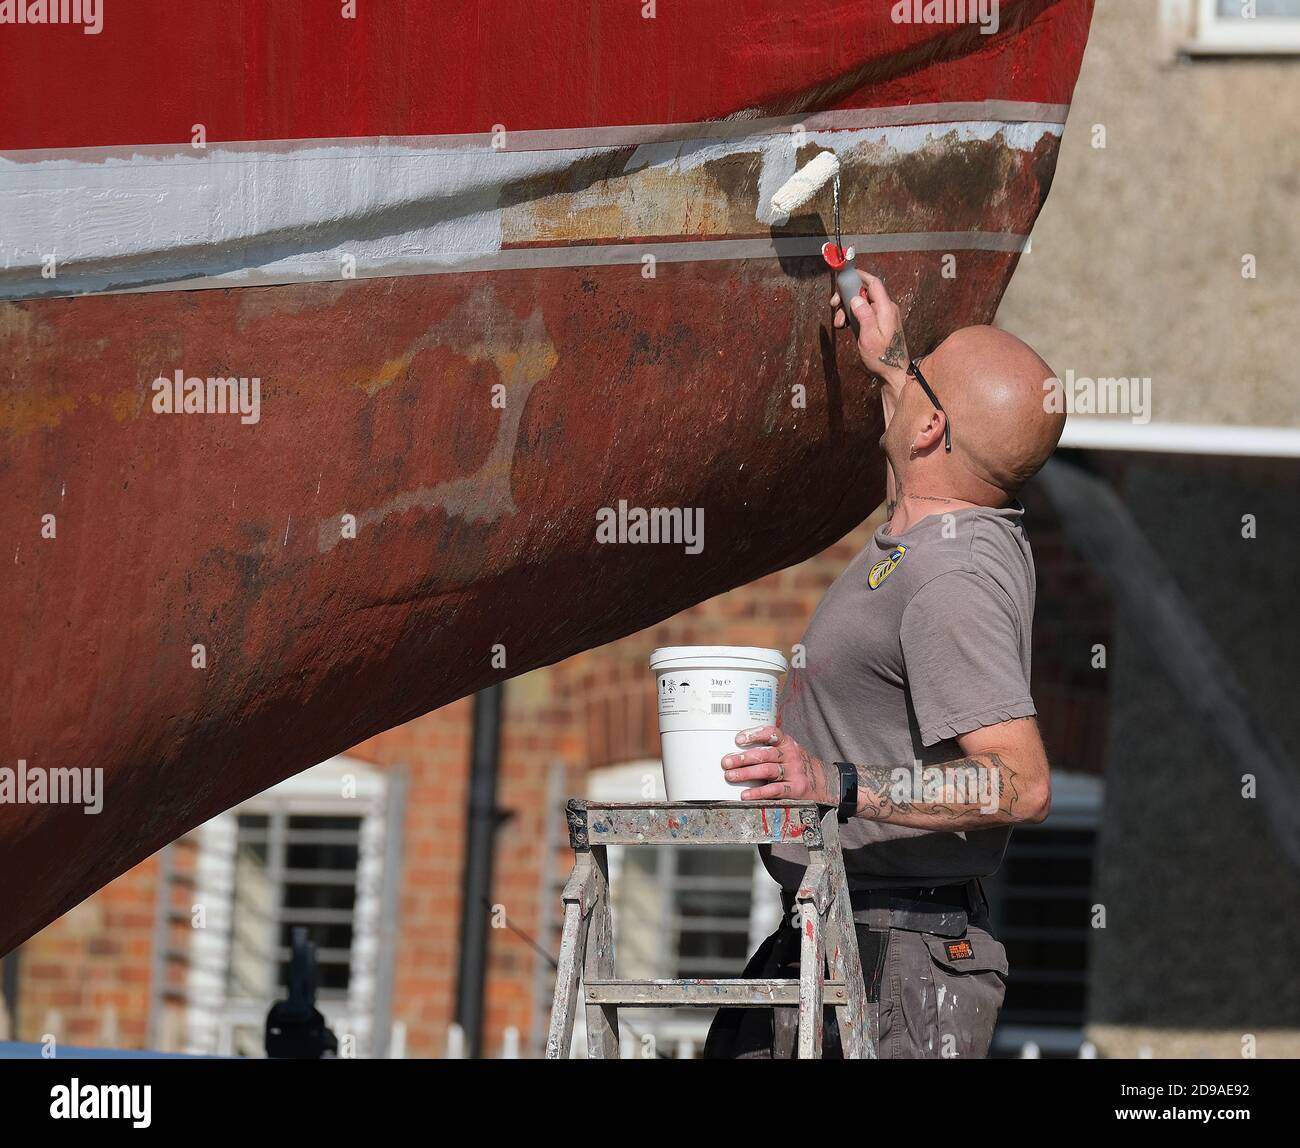 Boat out of the water at a seaside resort being cleaned and painted. Stock Photo